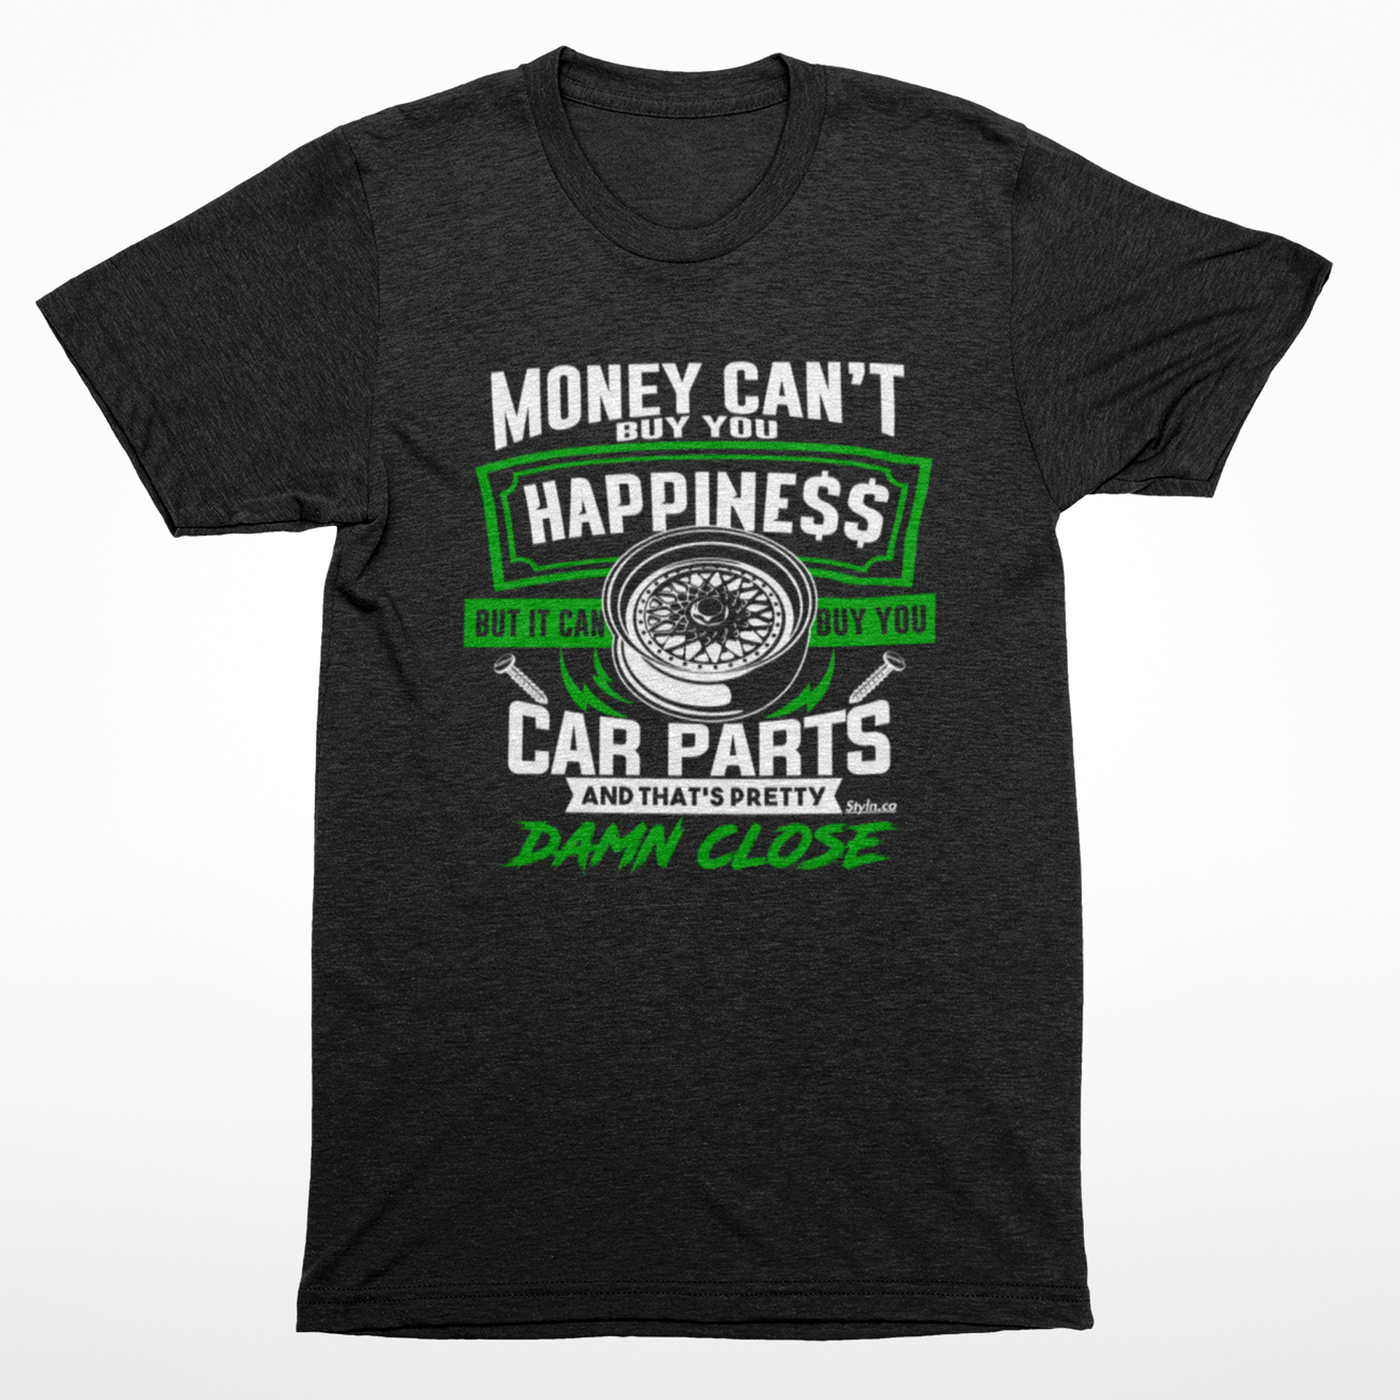 MONEY BUYS CAR PARTS HAPPINESS T-shirt